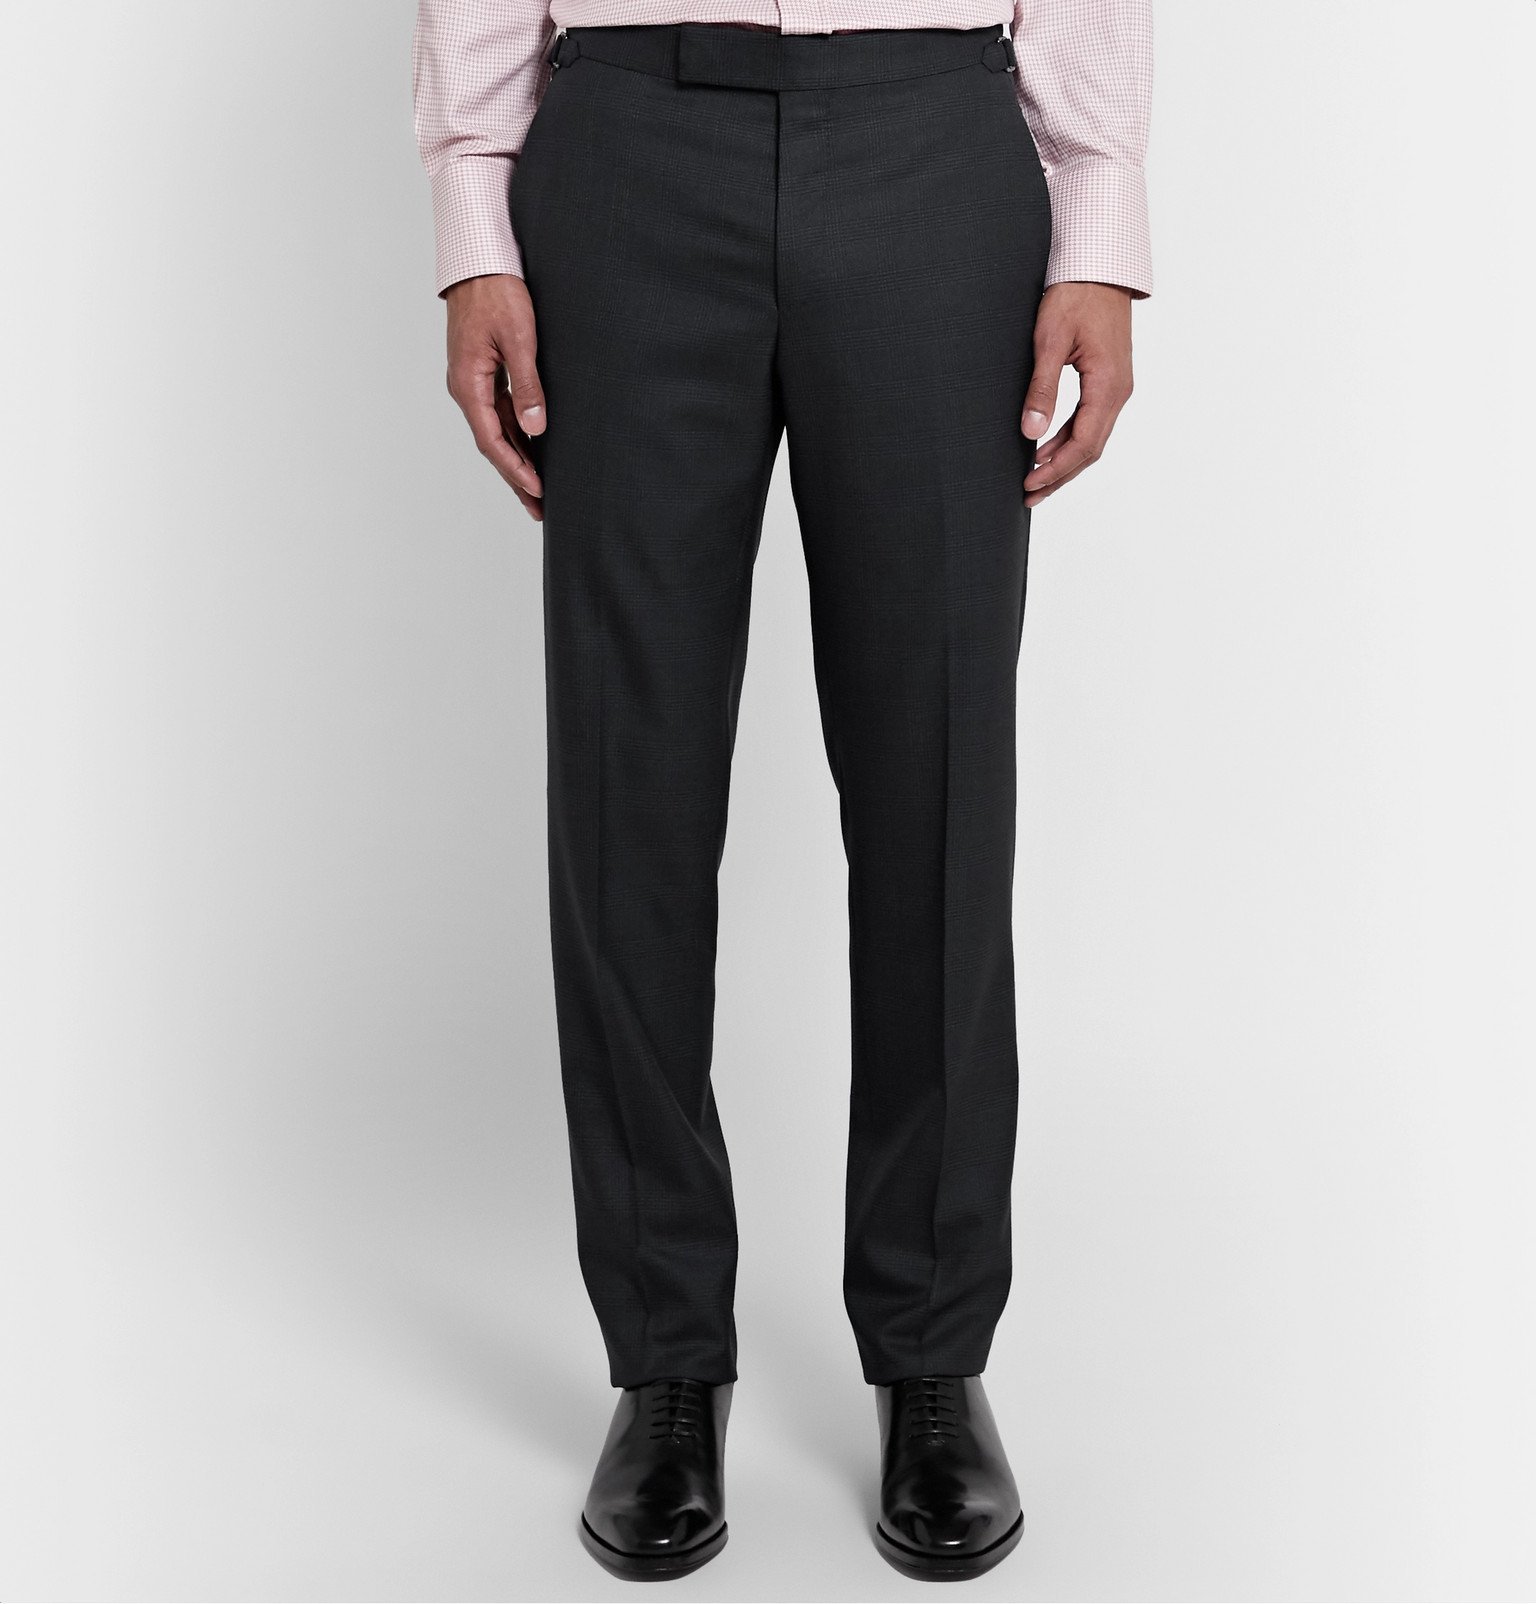 TOM FORD - Navy O'Connor Slim-Fit Prince of Wales Checked Wool Suit Trousers  - Blue TOM FORD